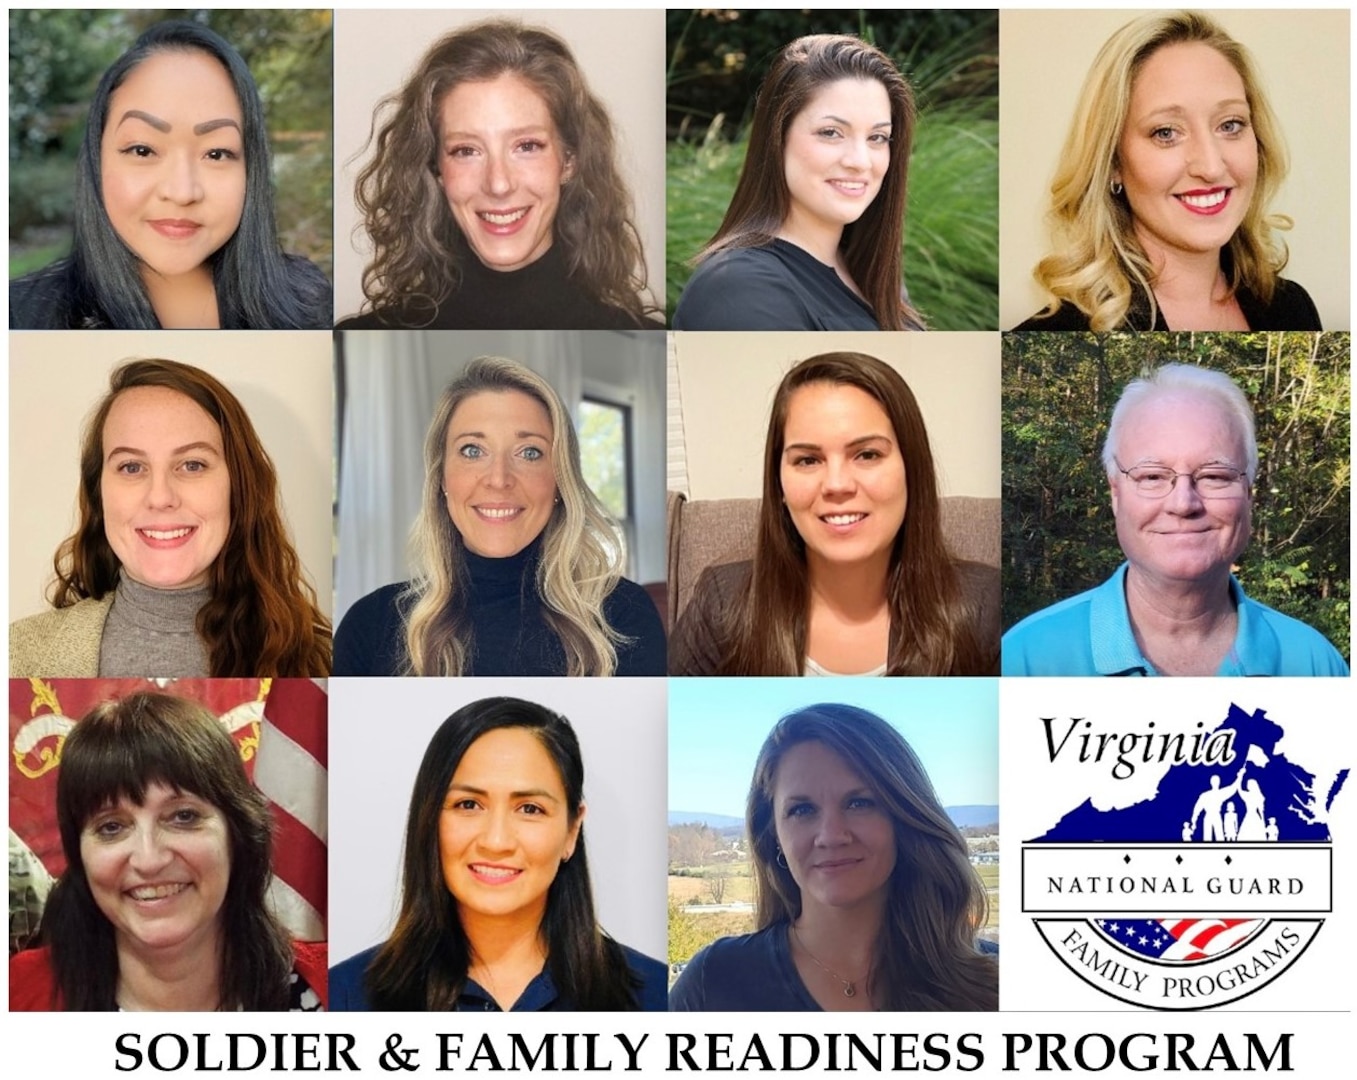 Virginia National Guard Soldier and Family Readiness Specialists provide assistance and non-medical case management to service members and families on a variety of subjects.